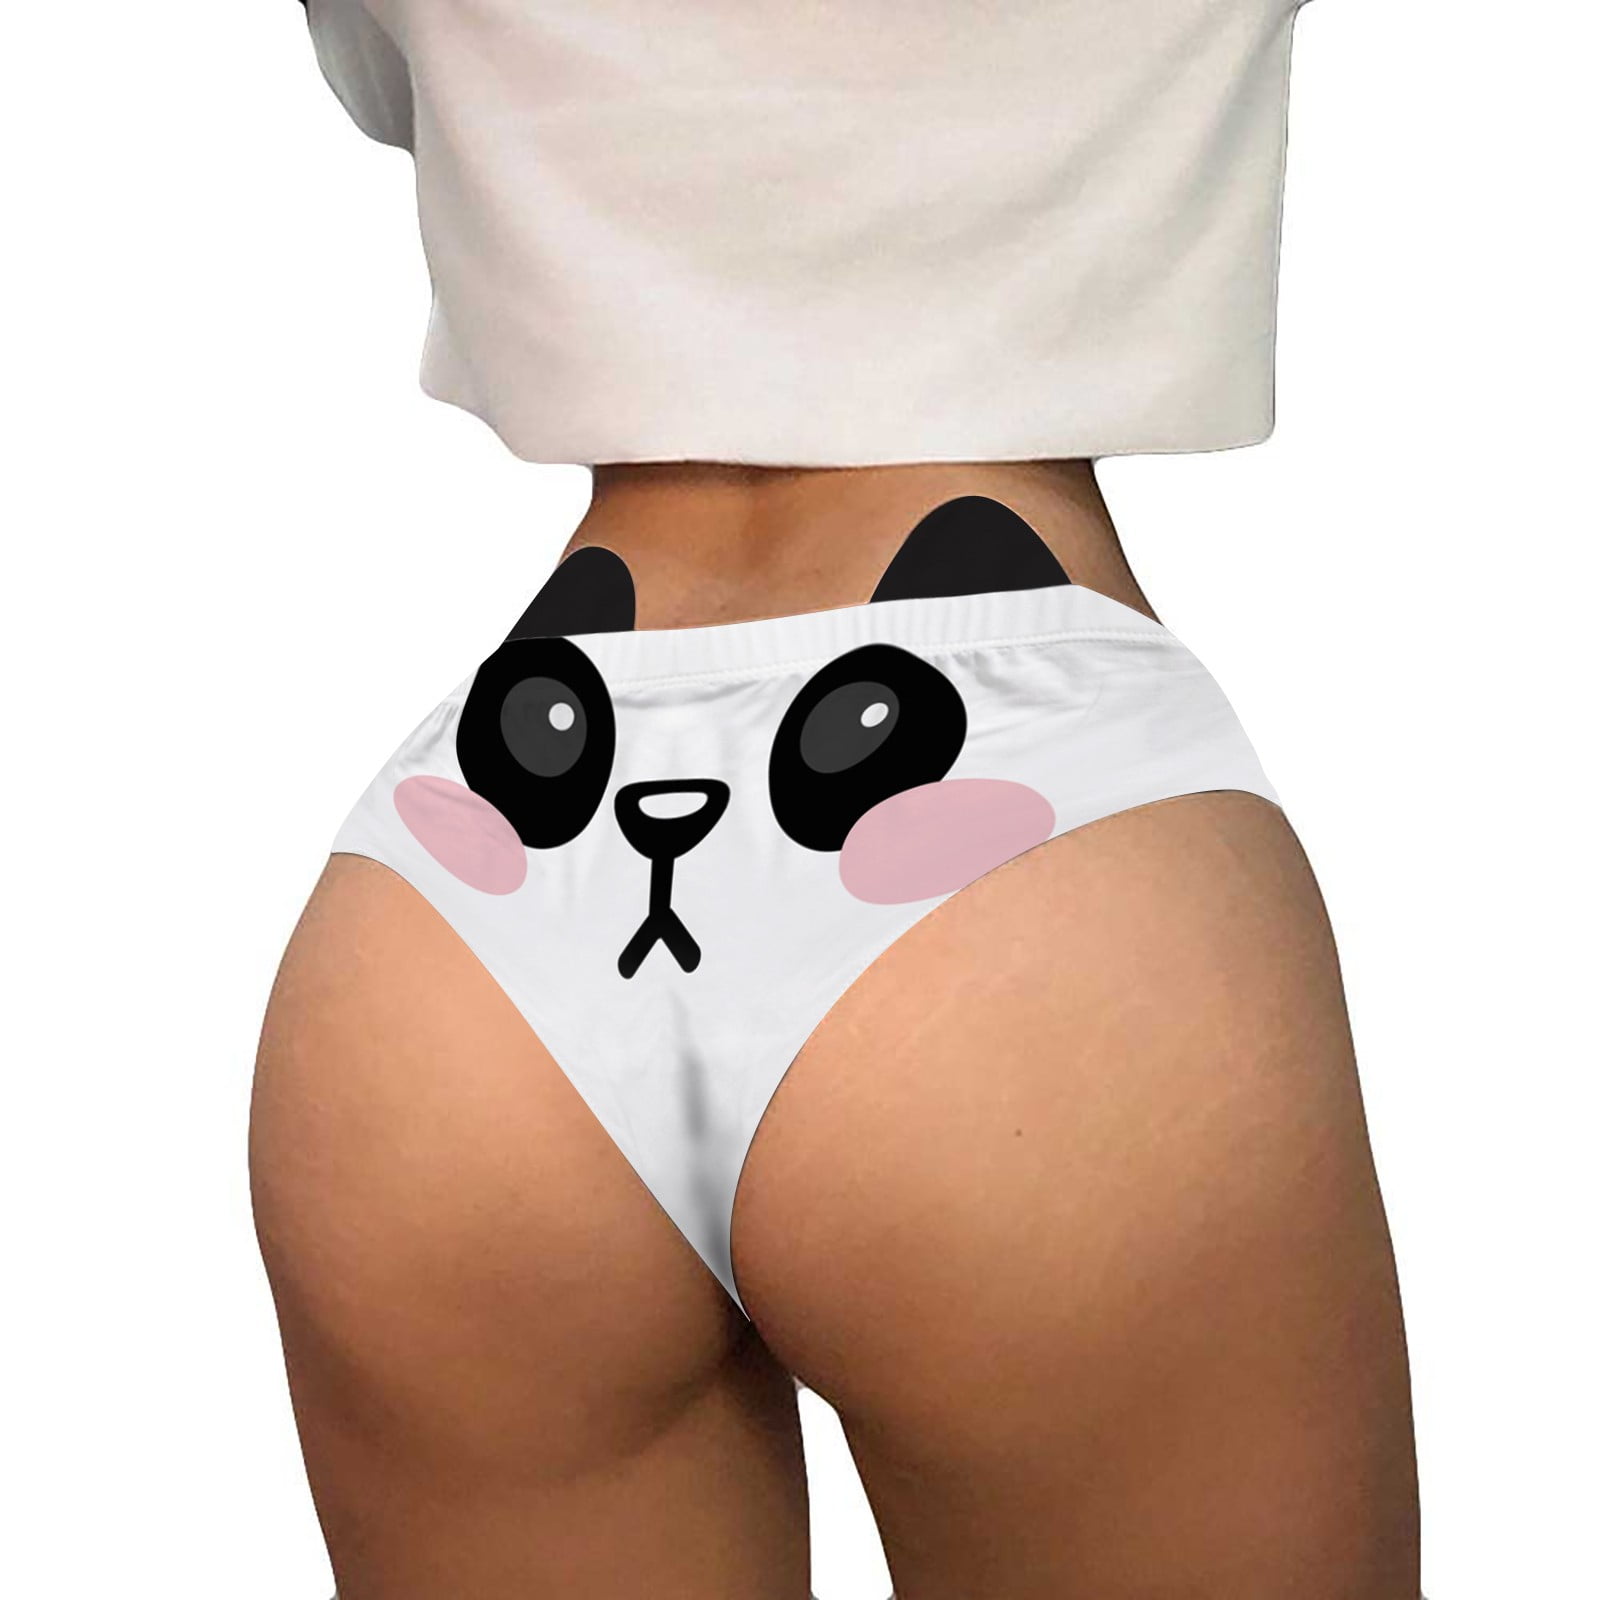 TAIAOJING Women's Underwear Briefs Flirty Funny 3D Cat Printed Animal  Middle Waist Tail Underwears Briefs Gifts With Cute Ears 6 Pack 